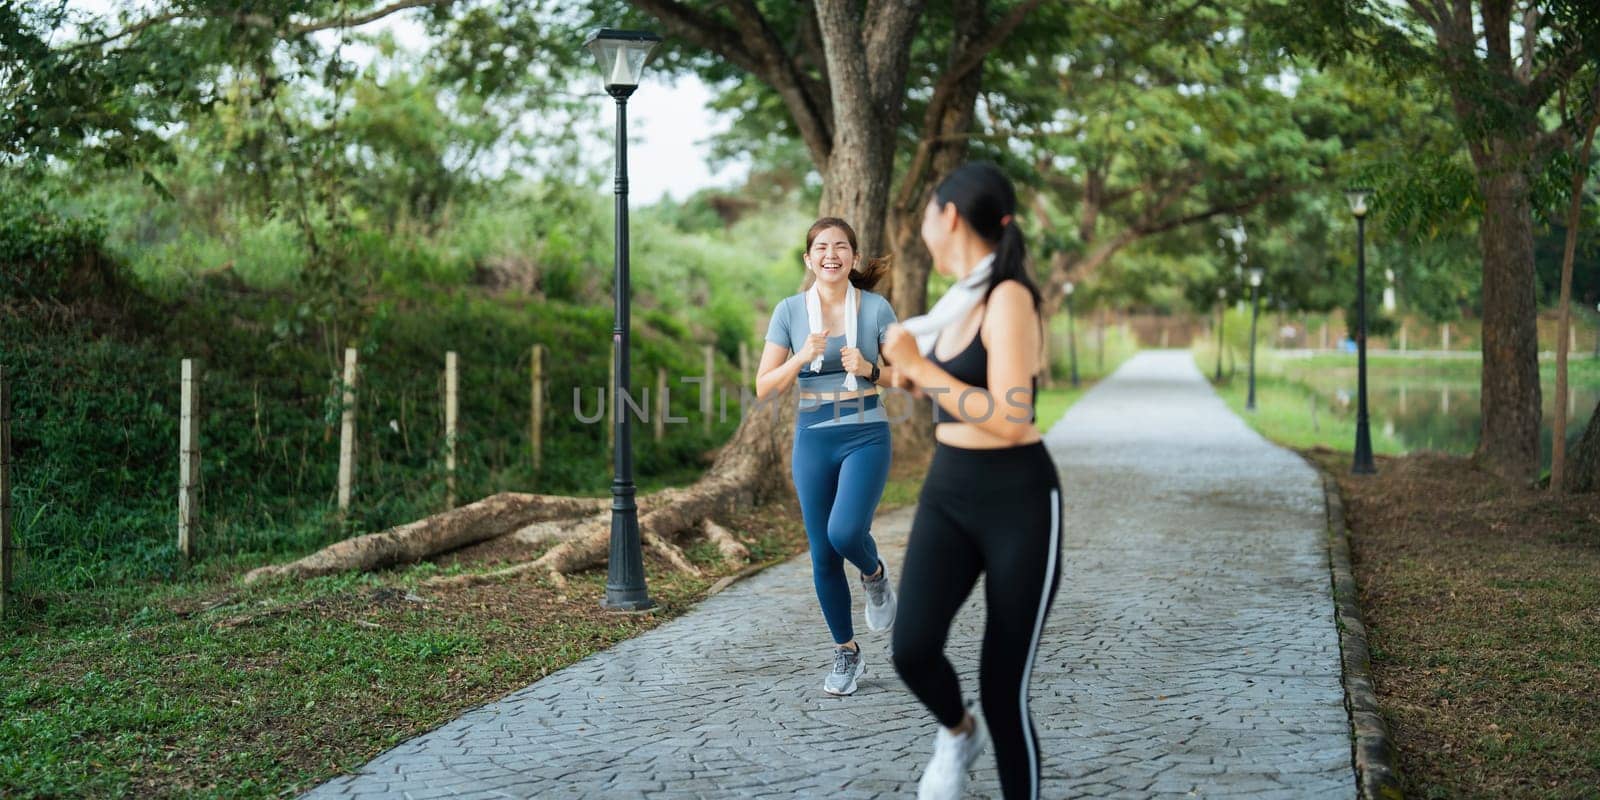 Healthy and active lifestyle, sport concept. Attractive ecstatic young sportswoman, smiling joyfully as jogging, sprinter run in park by nateemee